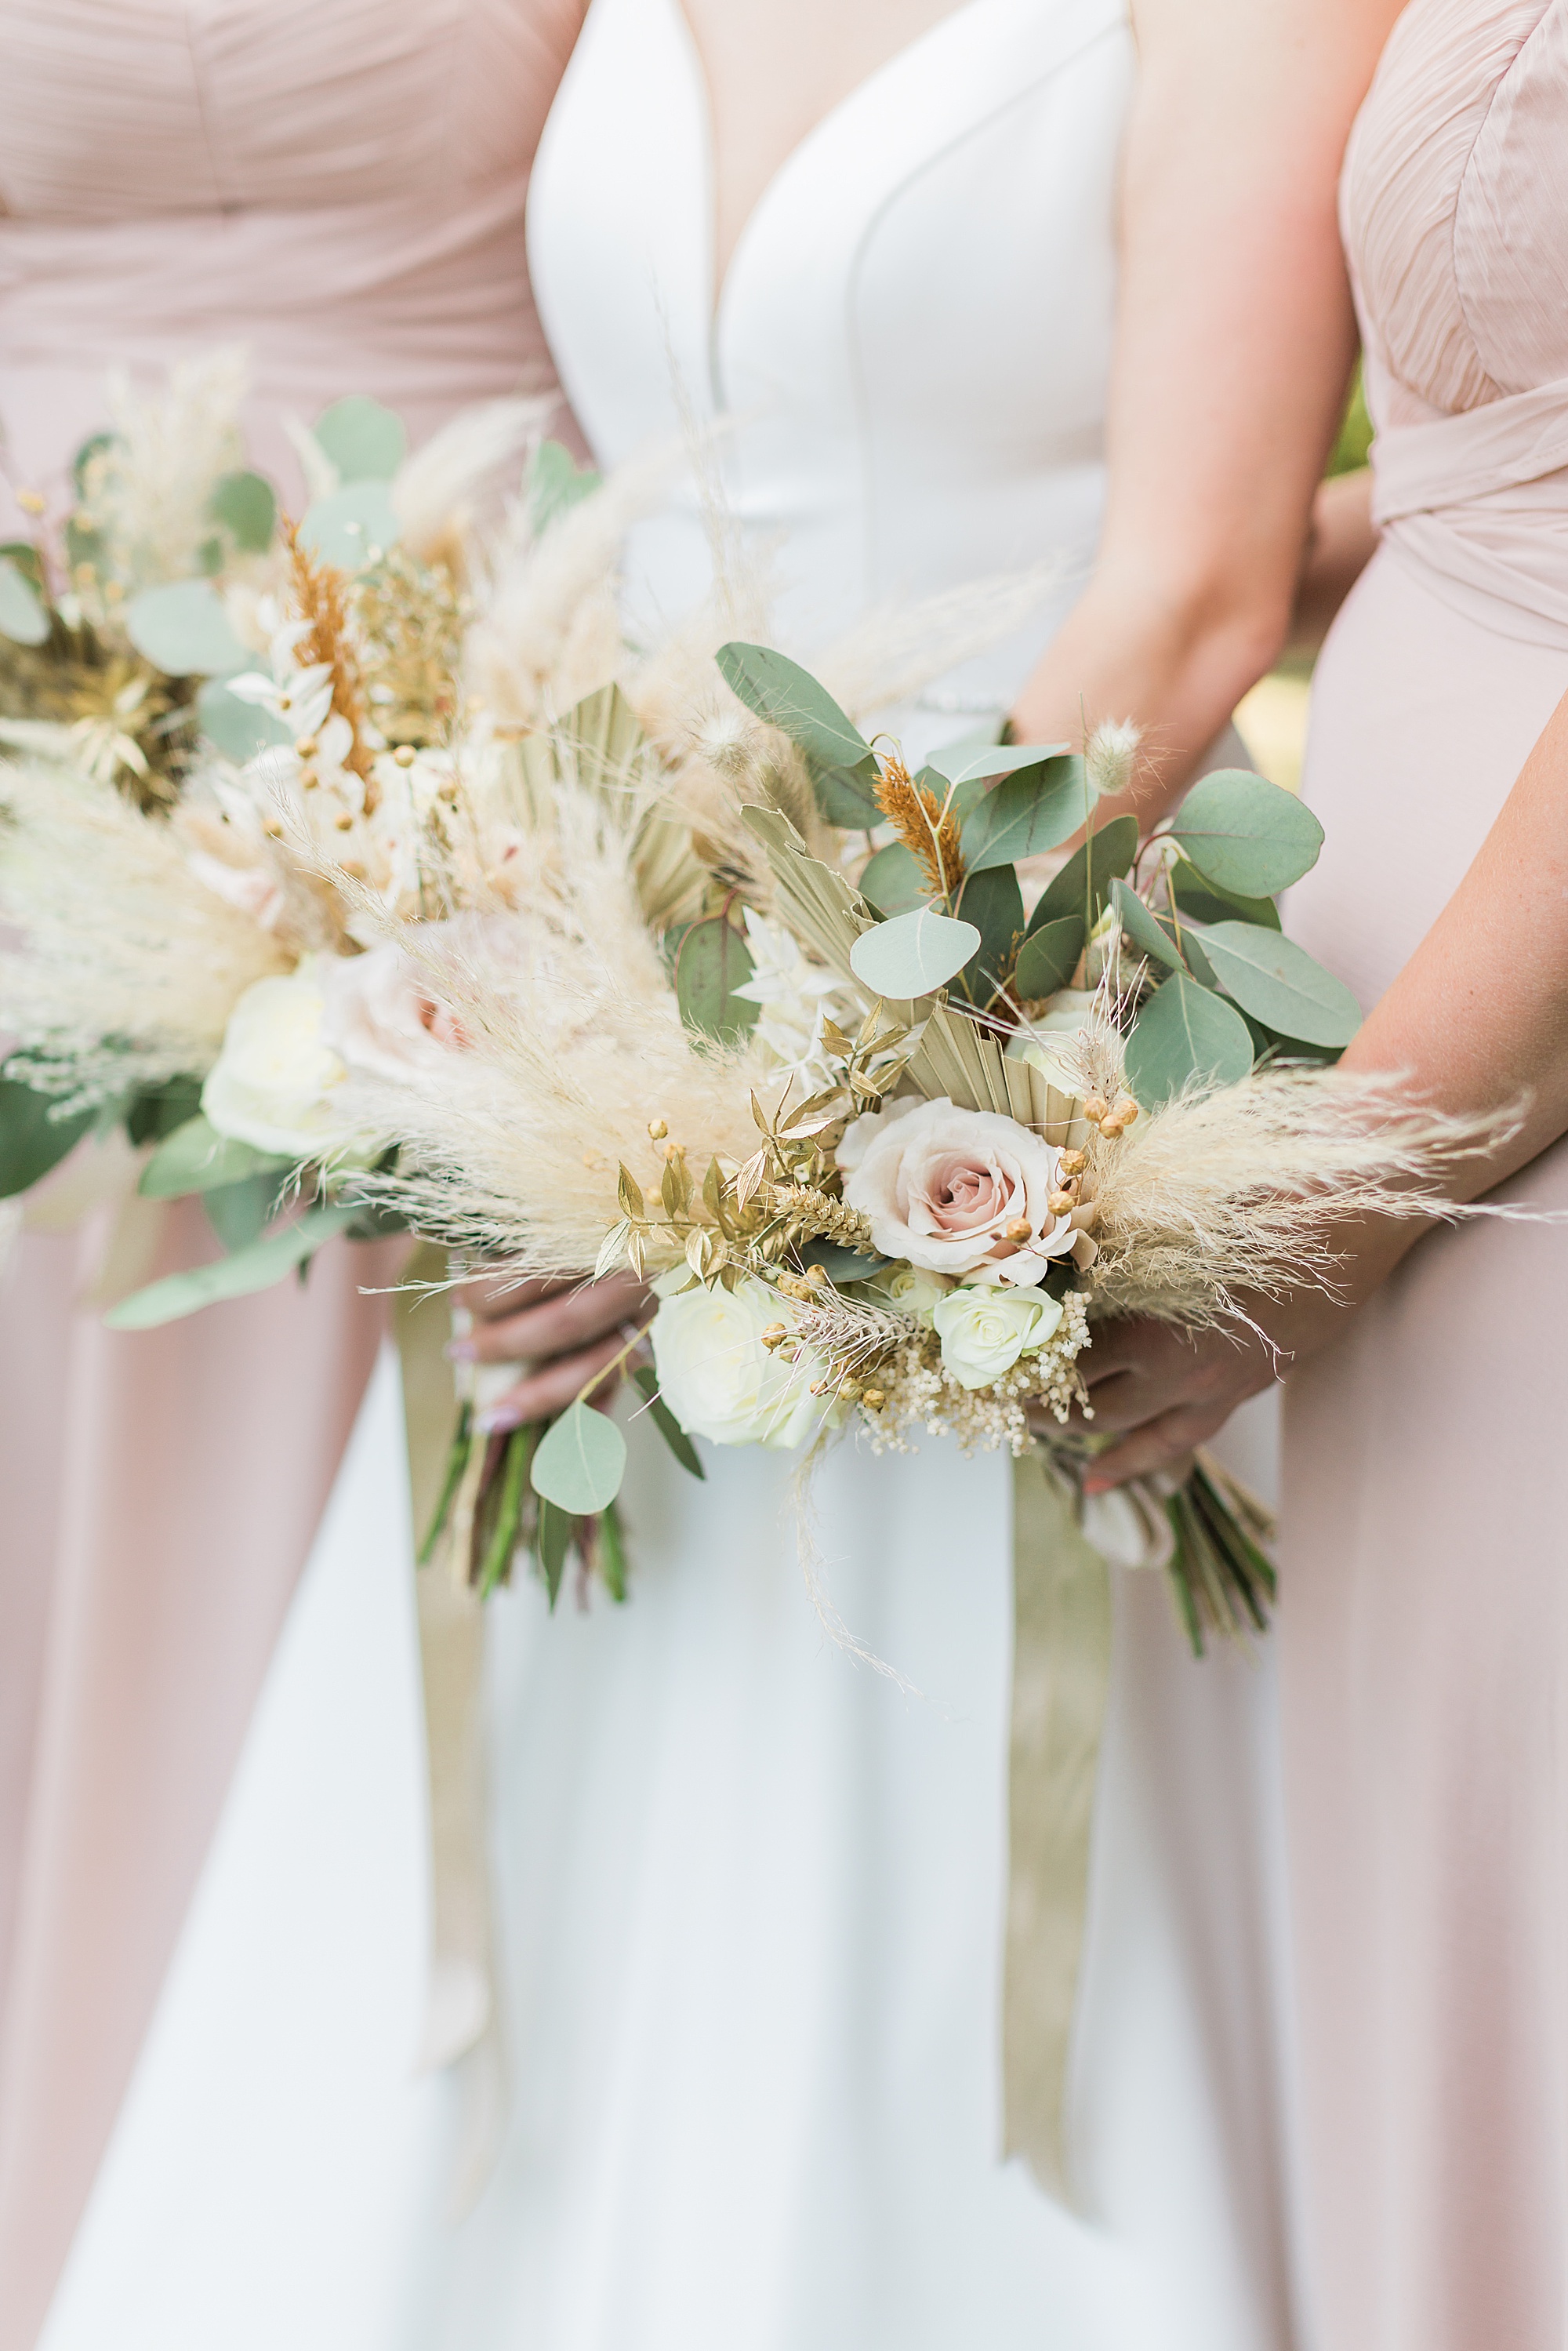 photo shows a bride and bridesmaids holding their gorgeous bouquets against their dresses. The photo doesn't show their faces but the focal point of this photo is the bouquets and dresses 